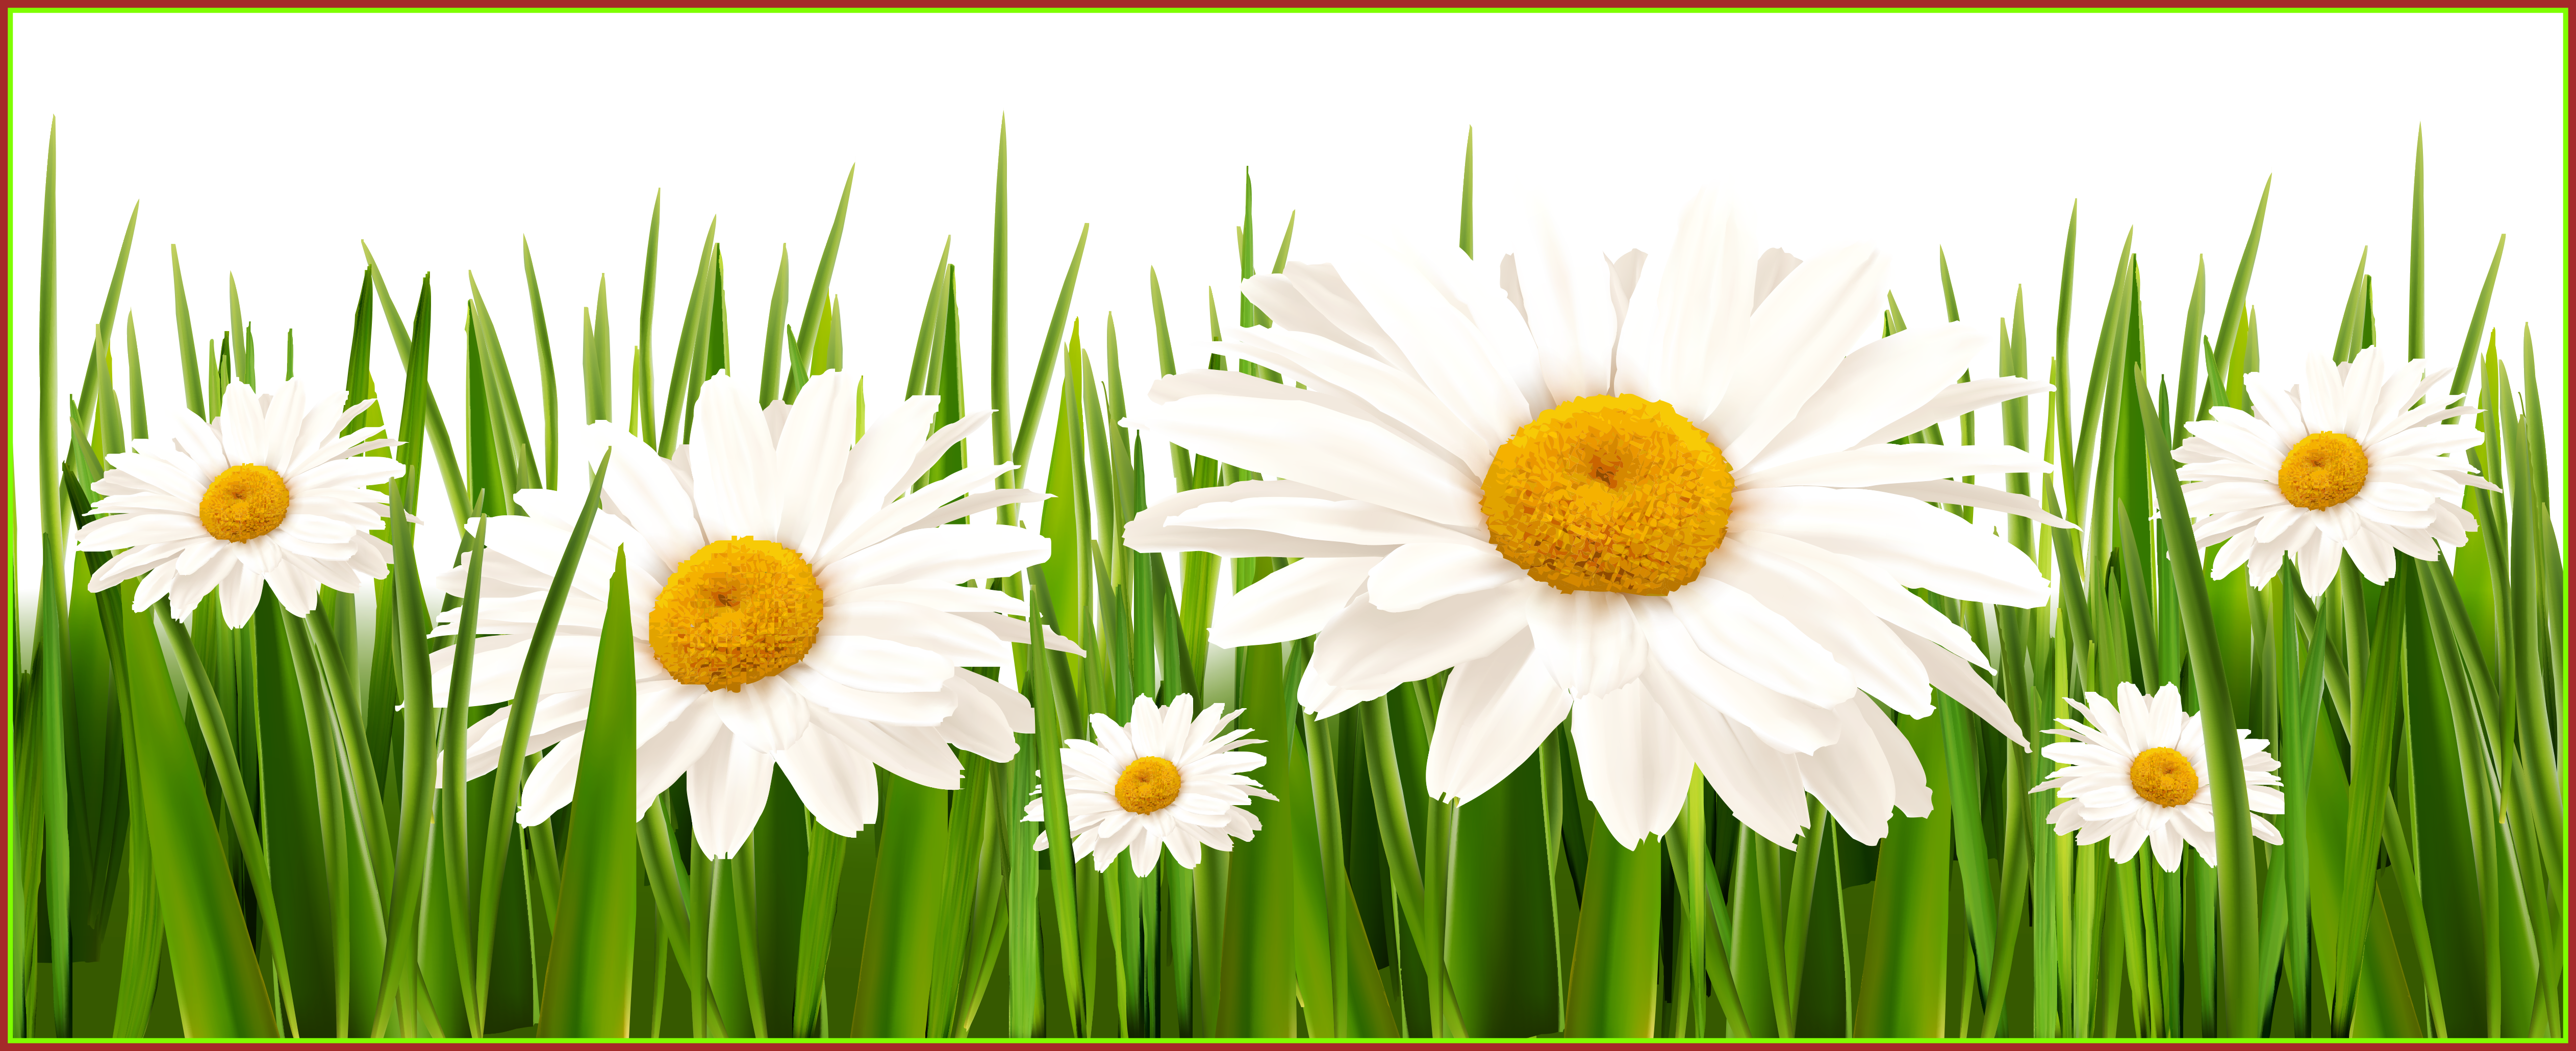 Appealing and white flowers. Daisy clipart high grass